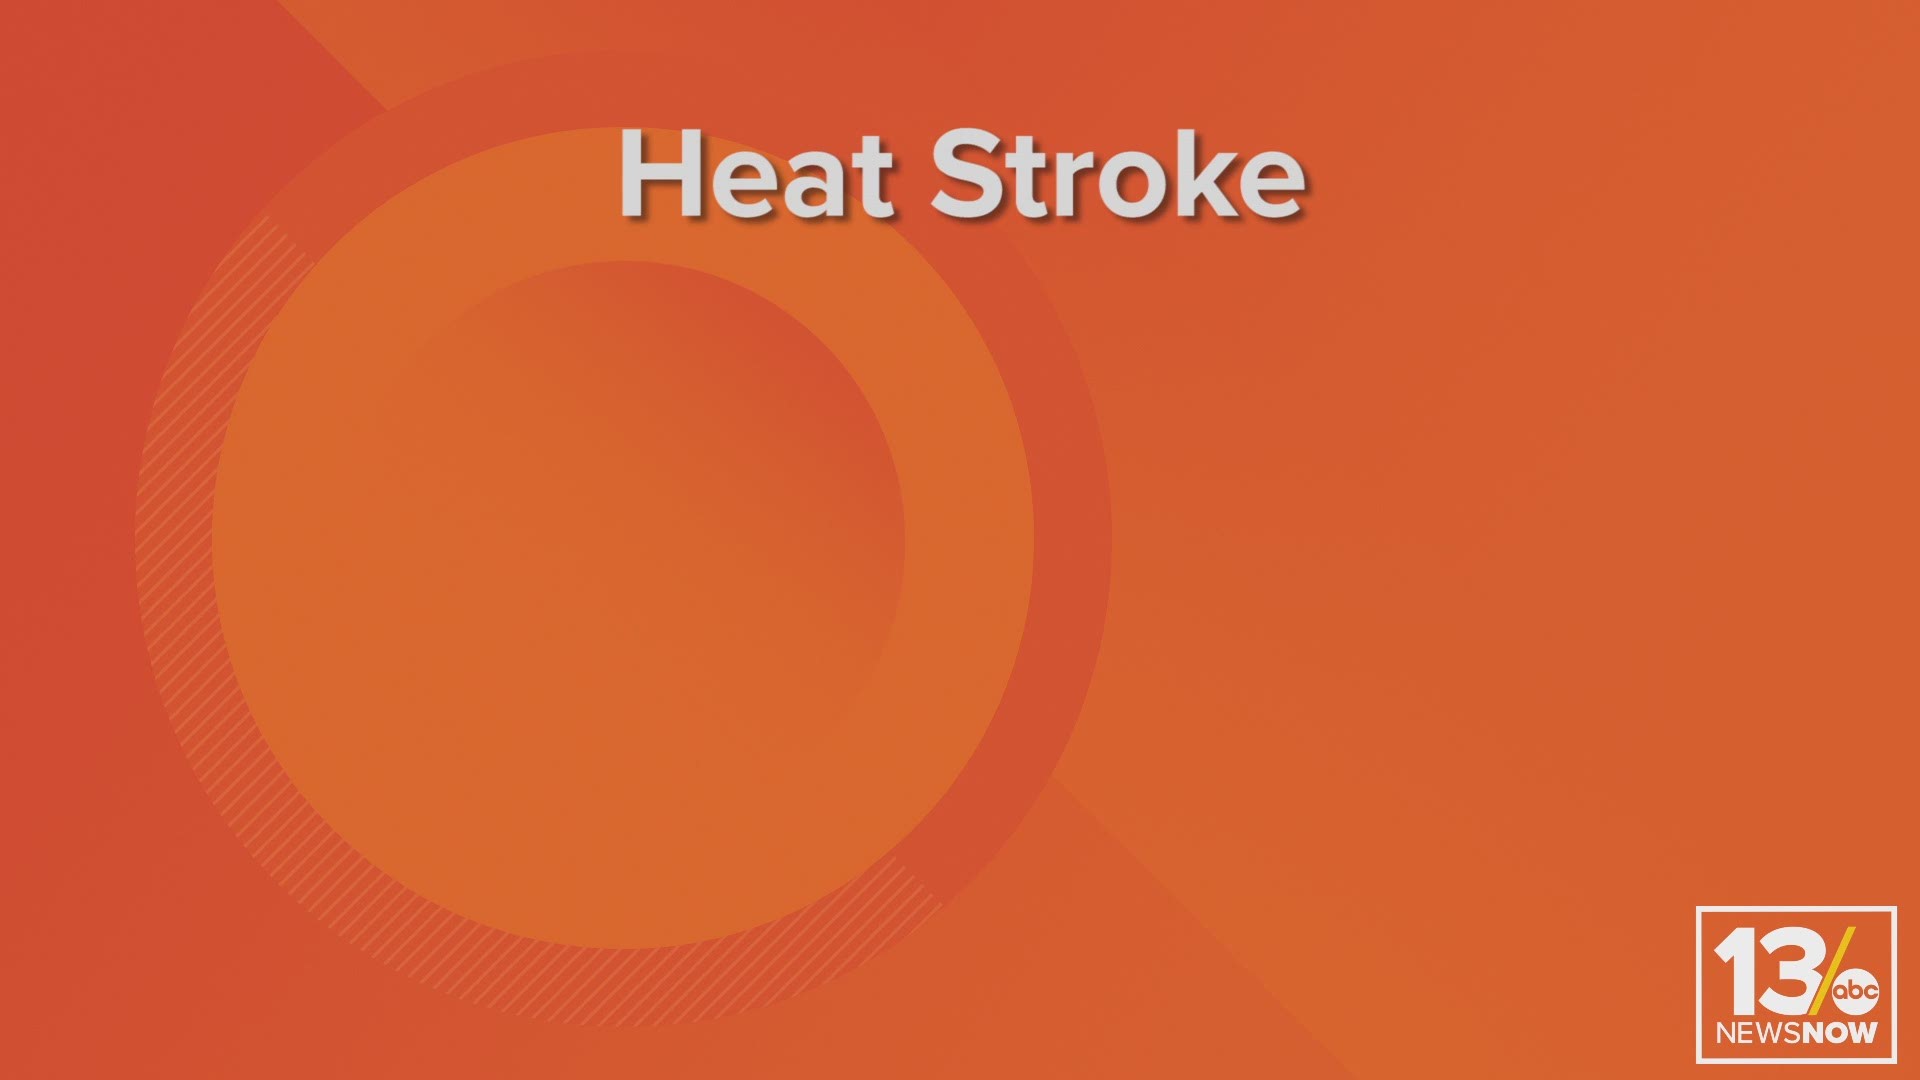 The CDC lists five heat-related illnesses on its website including heat stroke, heat exhaustion, and sunburns. It breaks down the warning signs and symptoms and lets people know what to do if they experience a heat-related illness or see someone who is experiencing one.